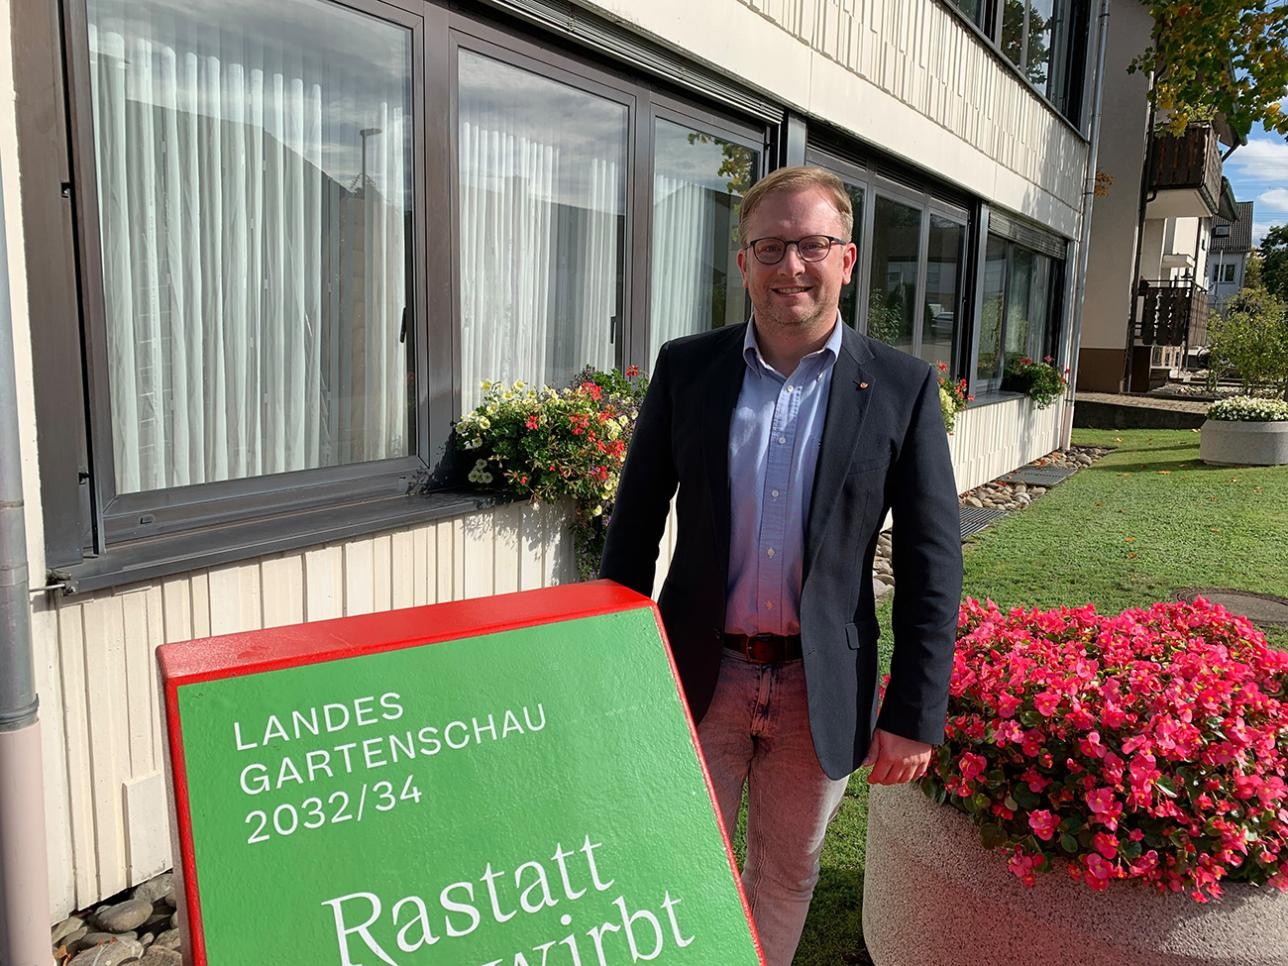 Local chief Thorsten Ackermann stands in front of the town hall in Rauental at the Landesgartenschau lounger